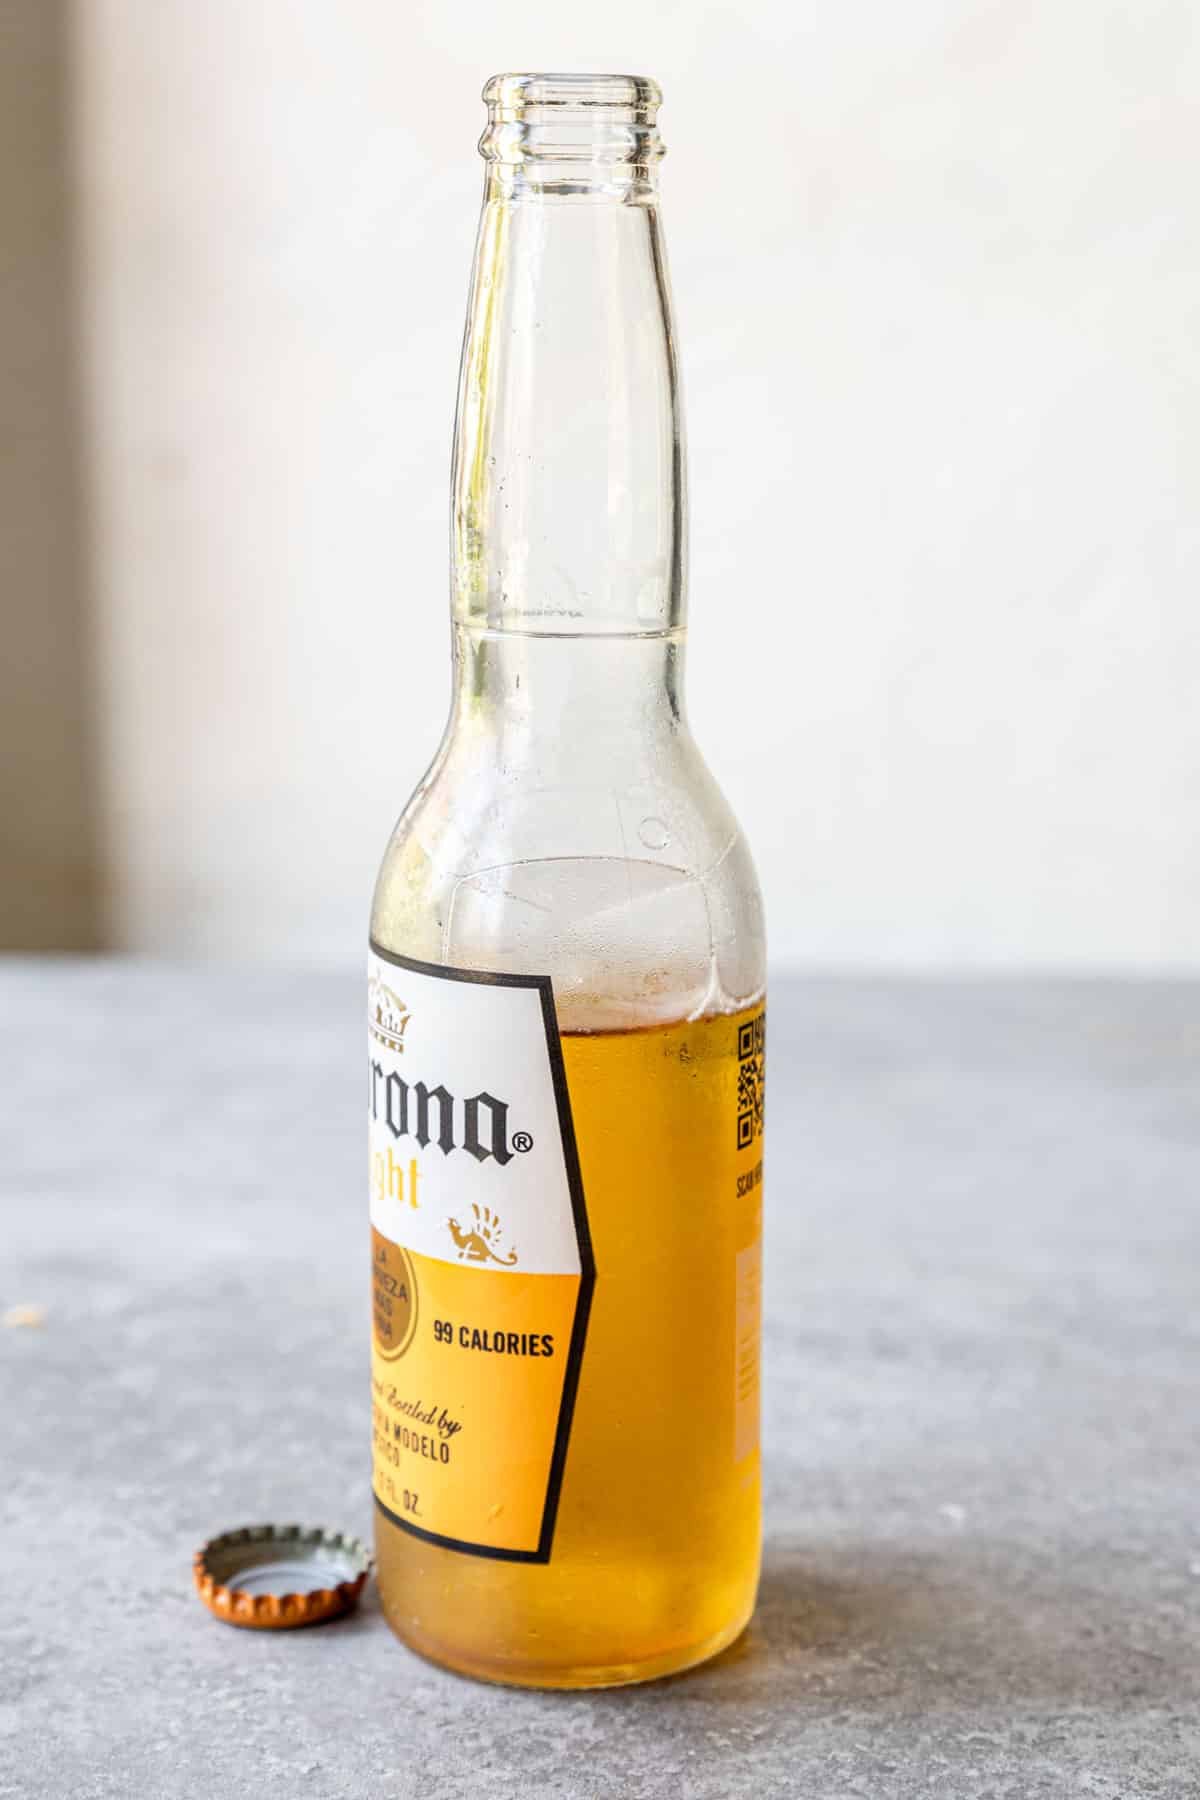 A Corona bottle with about ¼ of the bottle gone